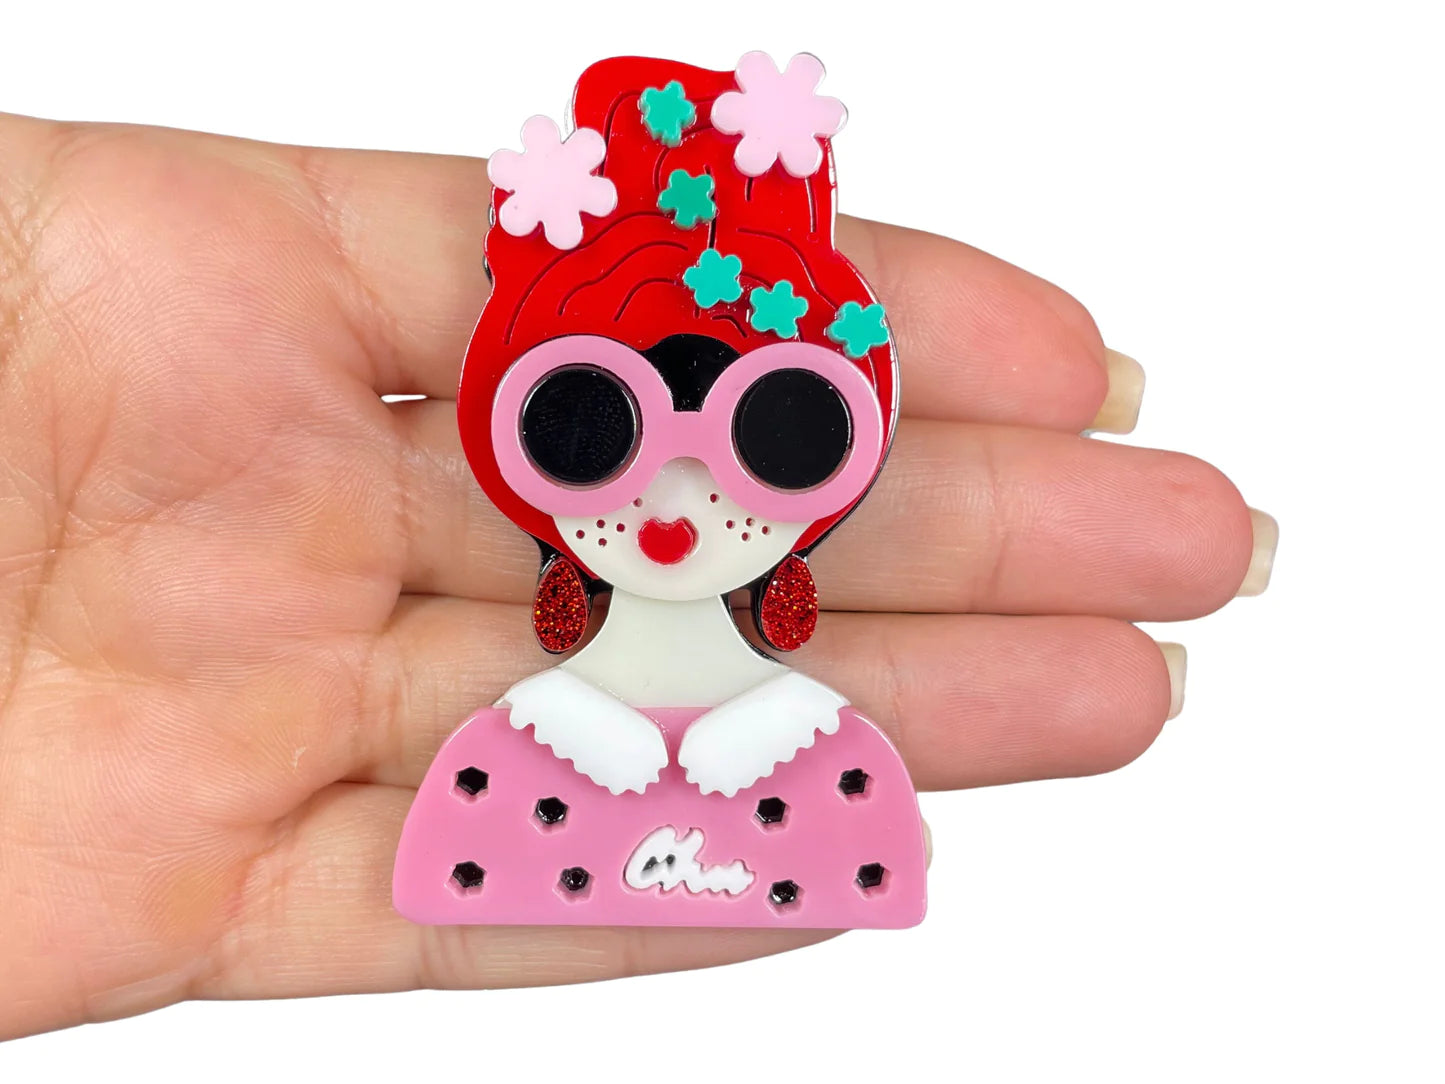 Quirky Acrylic Lady Figure With Red Hair Pin Brooch